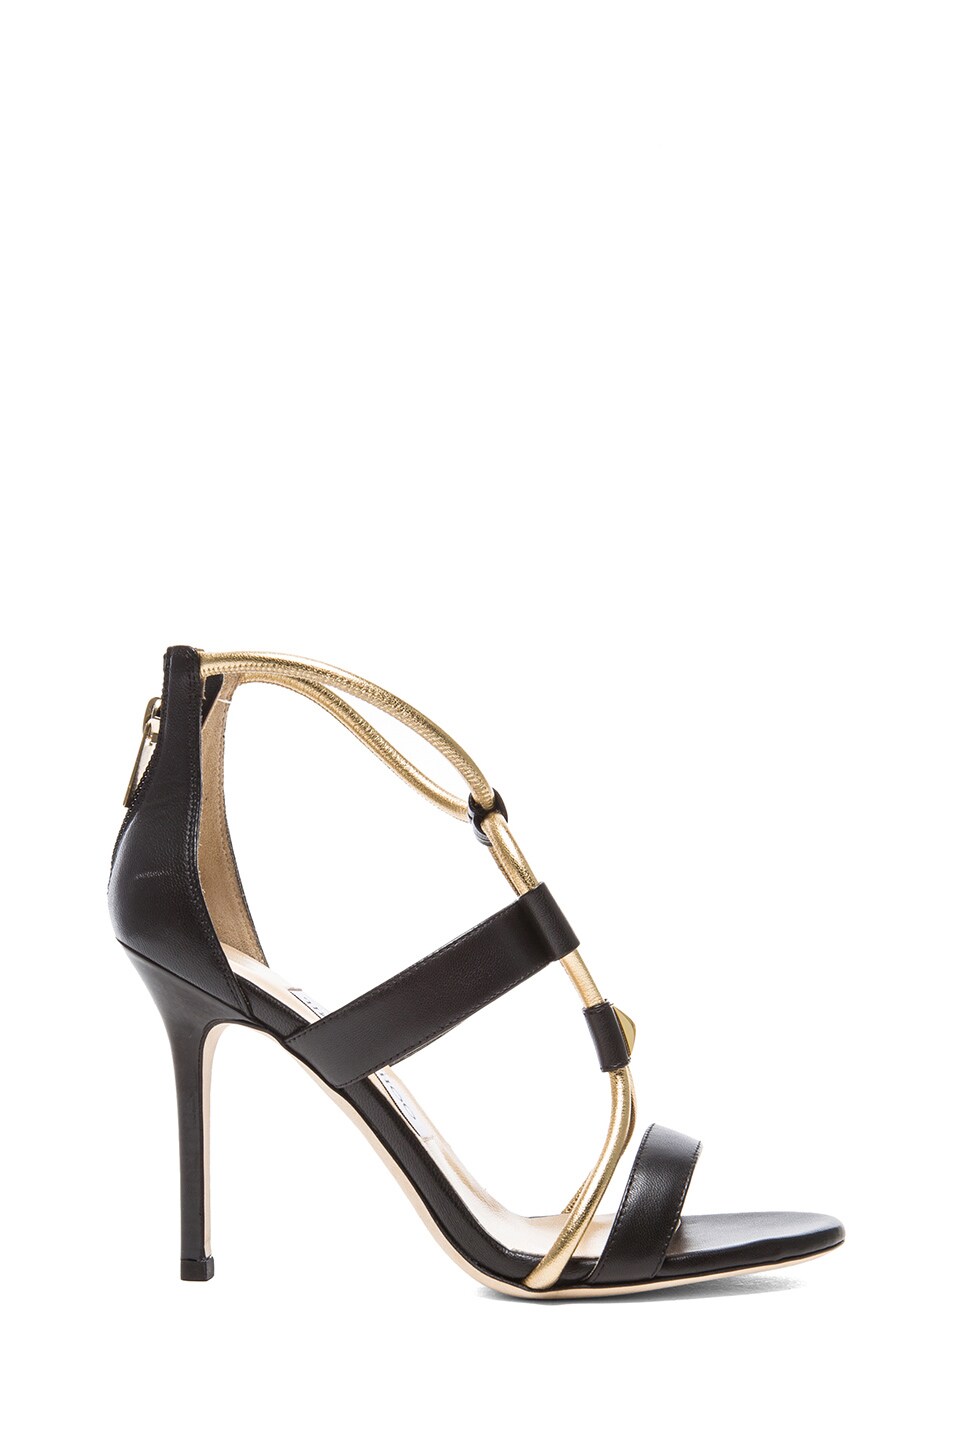 Image 1 of Jimmy Choo Nappa Leather Heeled Sandals in Black & Gold